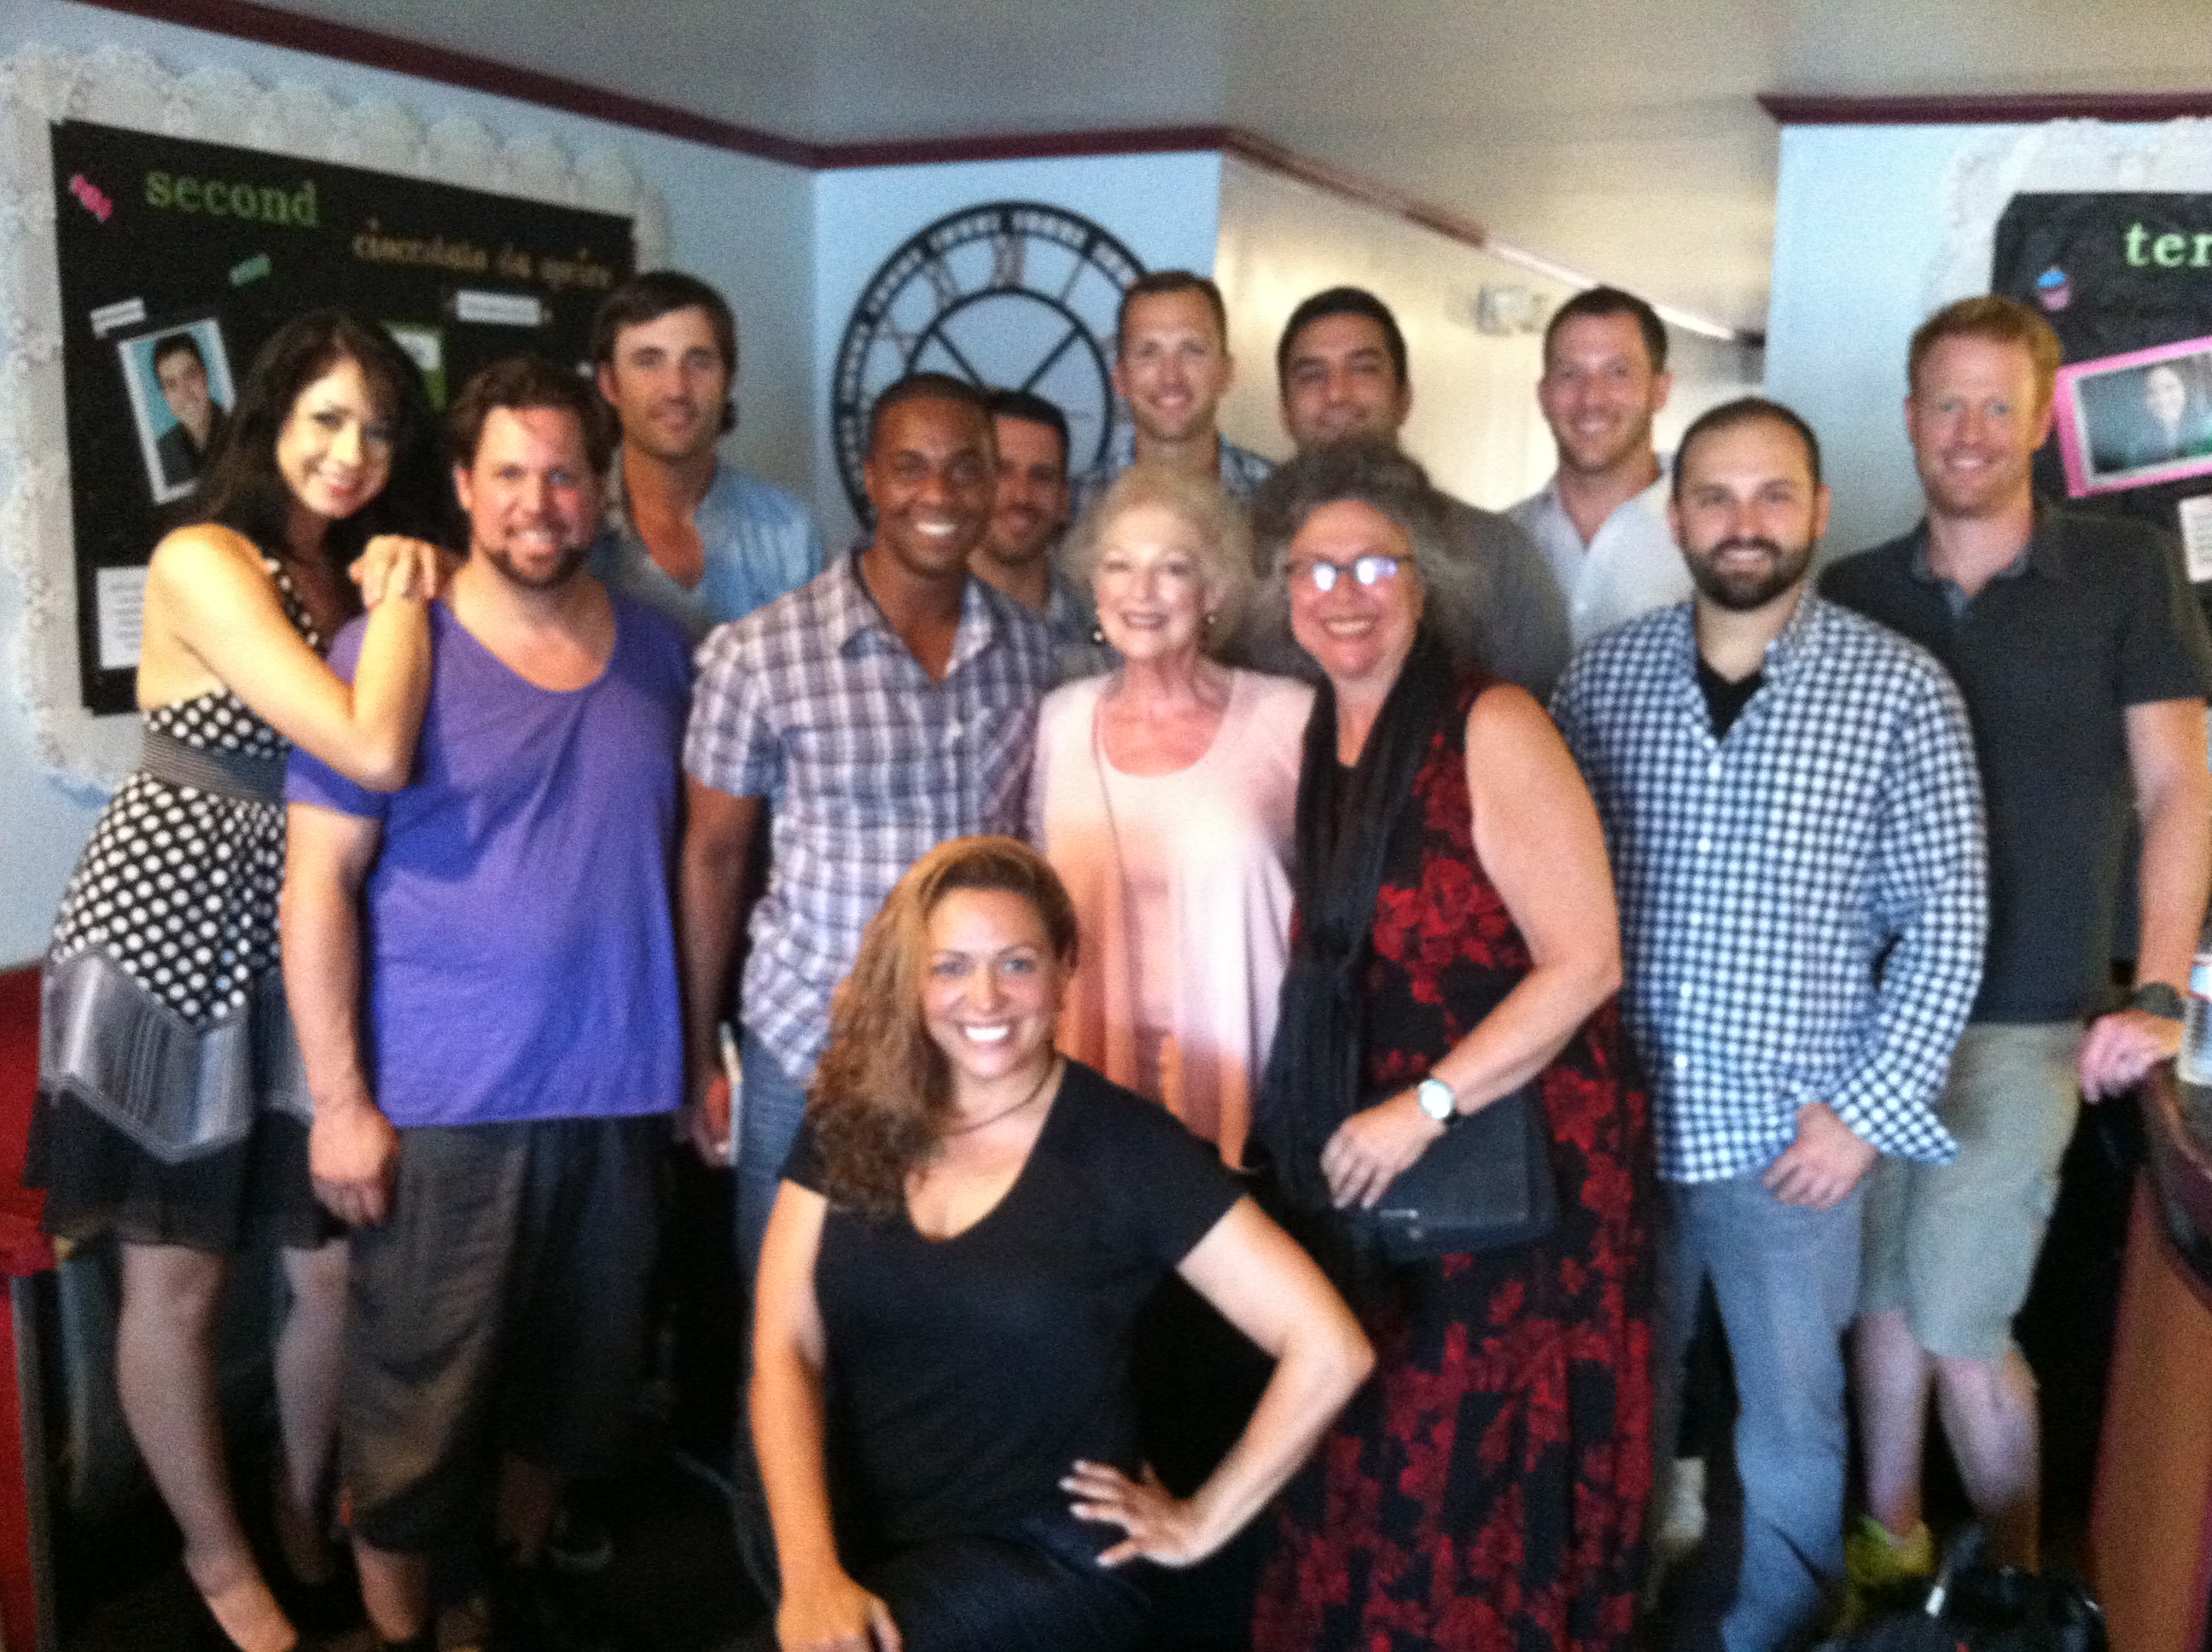 8-12-2013 Happily Hangin' with super fun super band STRAIGHT NO CHASER, LtoR: Candice, Chad,Mike,Jerome, MV Director,Liz Imperio(kneeling),me(Jane Shayne),Rhoda Pell,Walt,Steve, Seggie,Dave, Tyler, Don